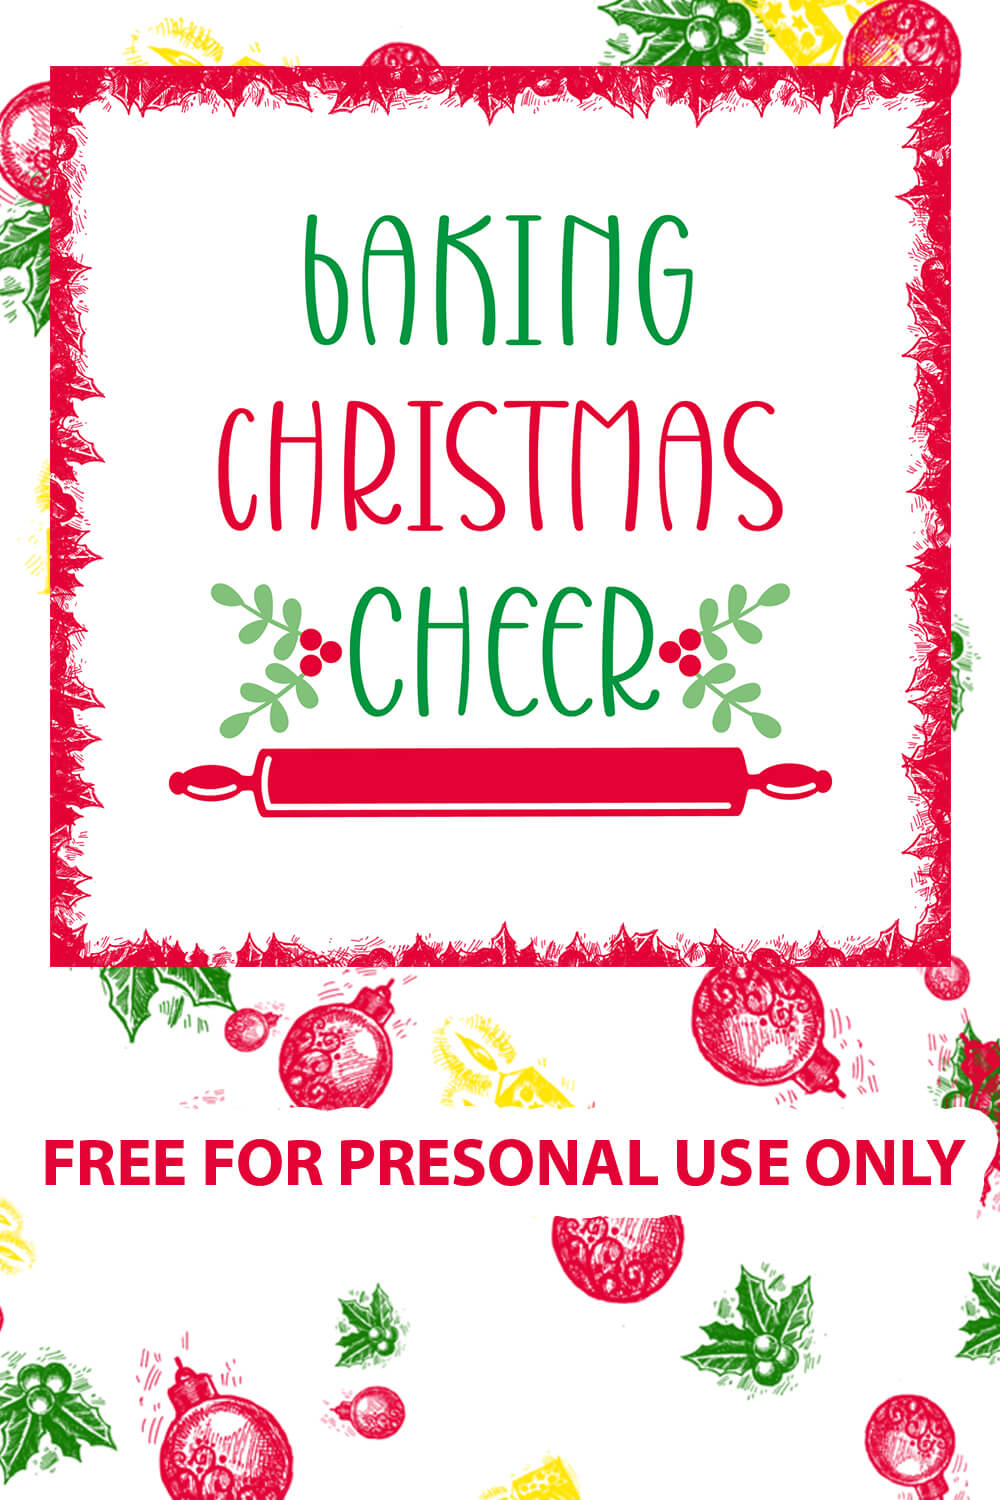 Quote baking Christmas cheer free SVG files pinterest image.